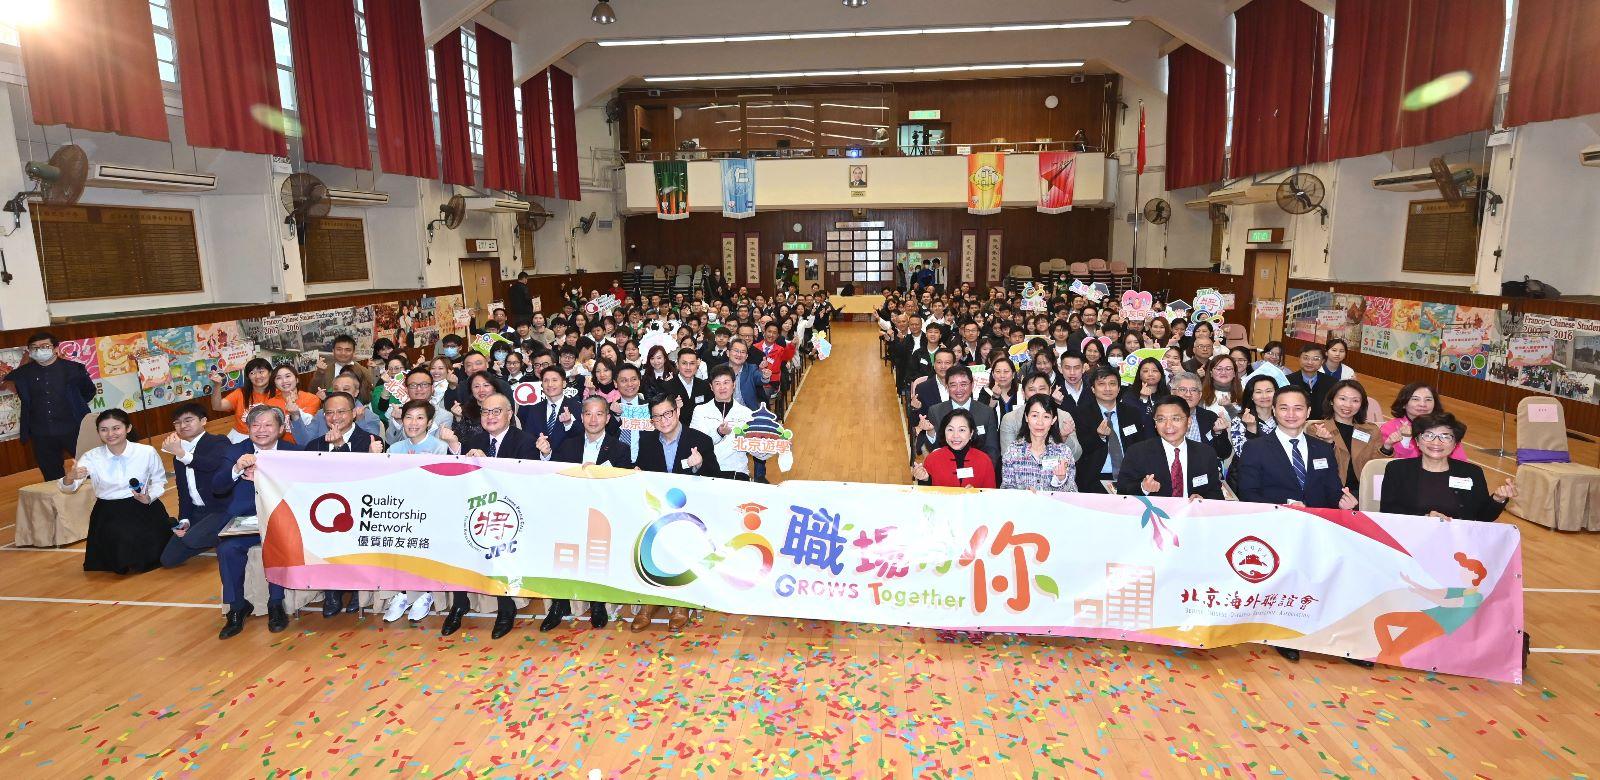 Tseung Kwan O District (TKODIST) Junior Police Call (JPC), in collaboration with Hong Kong Quality Mentorship Network, held the kick-off ceremony for the firstly-launched life planning project "GROWS Together" today (February 4). The project has gained support from numerous JPC School Club secondary schools in TKODIST. More than 90 senior secondary students from 13 secondary schools have joined the project.